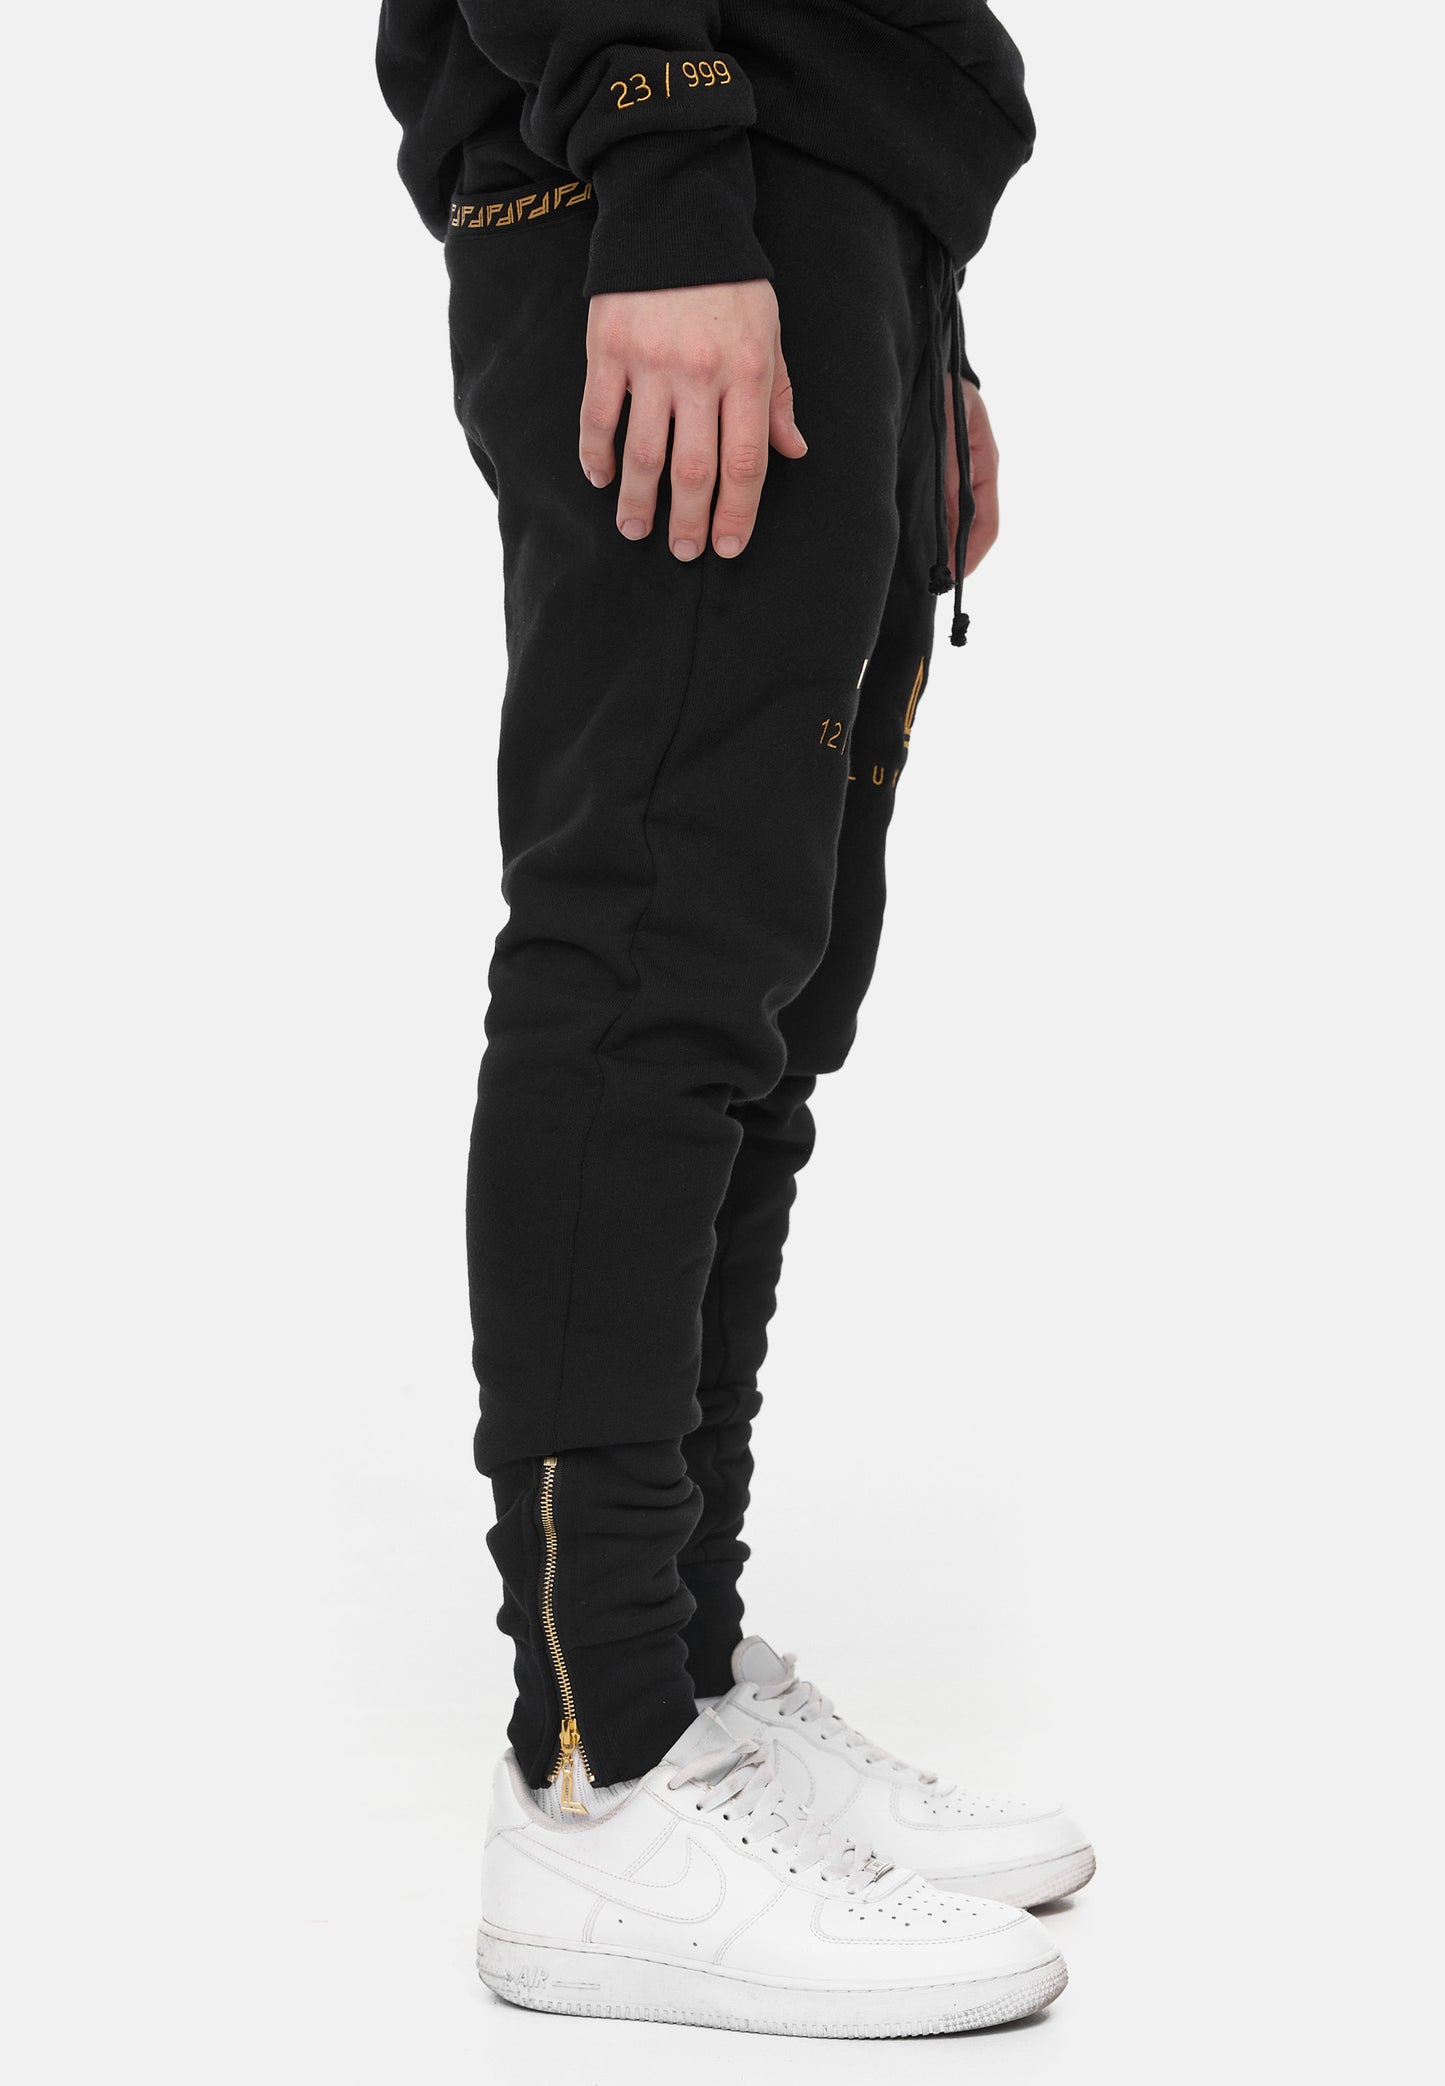 LUXAGER Sweatpants classic